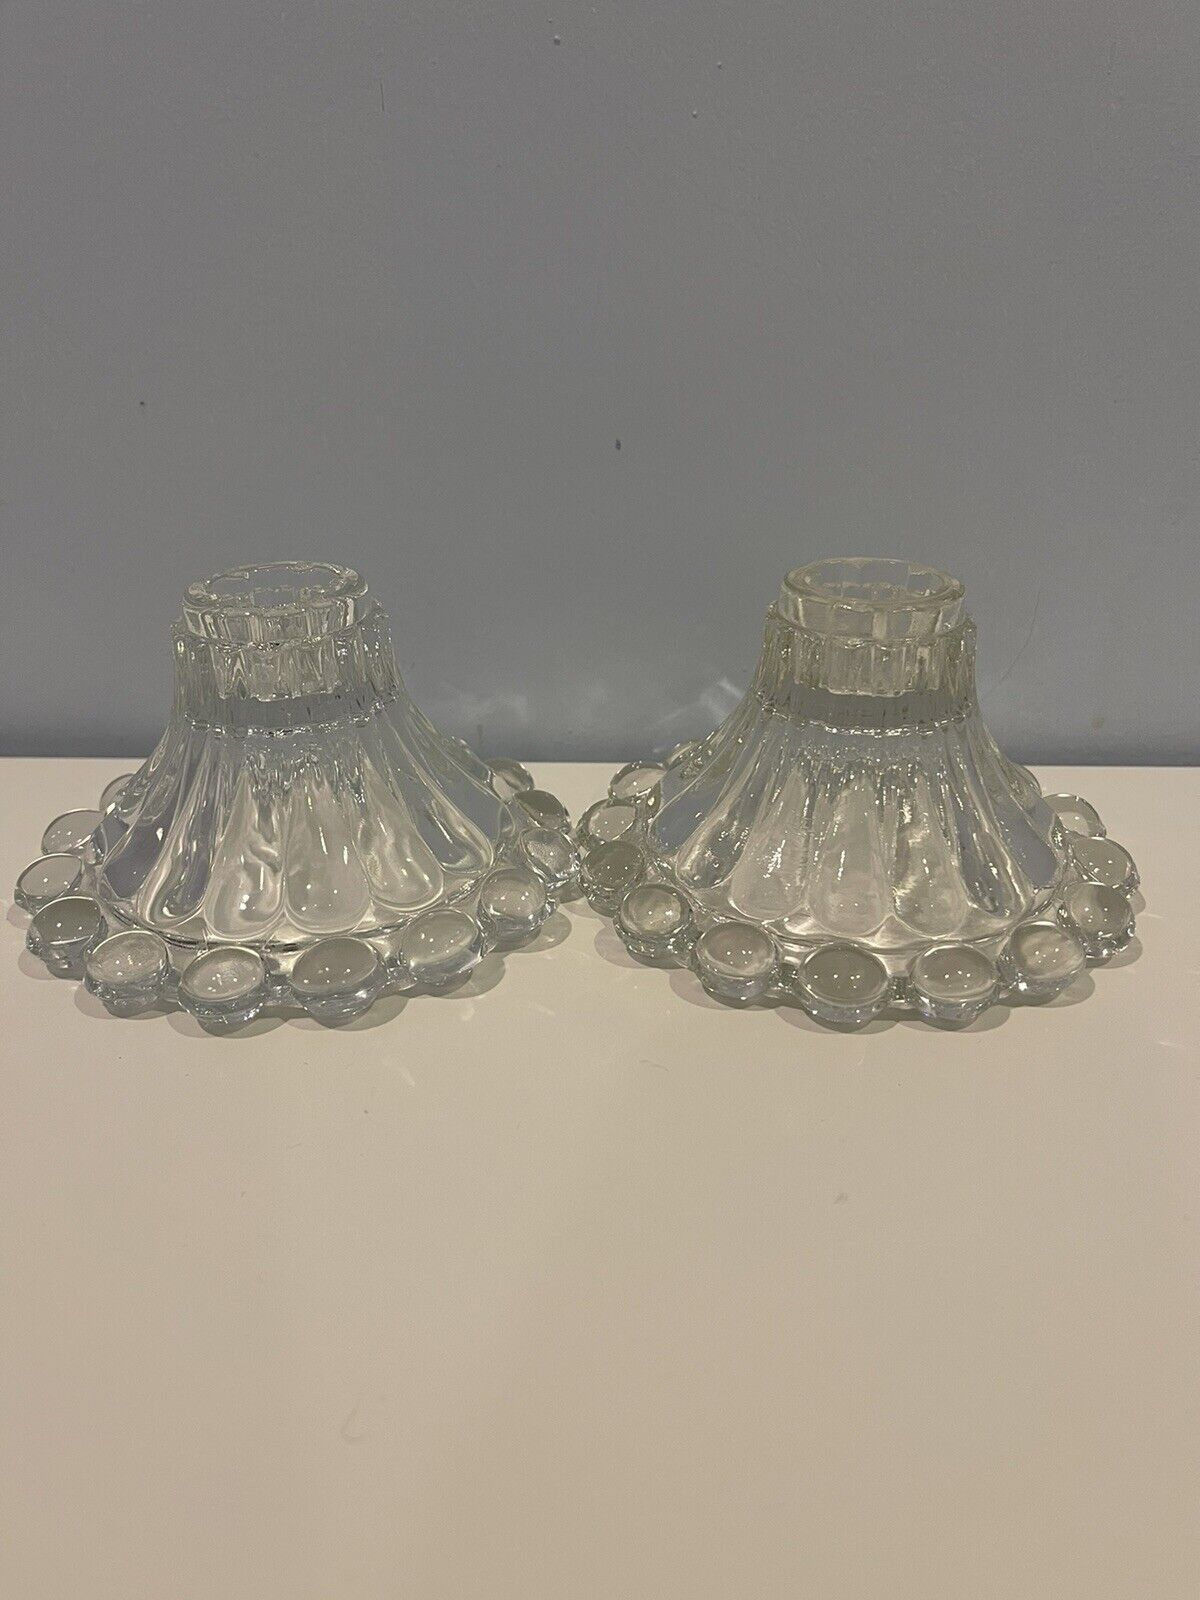 Vintage Glass CandlestickBoopie Bubble Taper Candlestick Candle Holders Set of 2